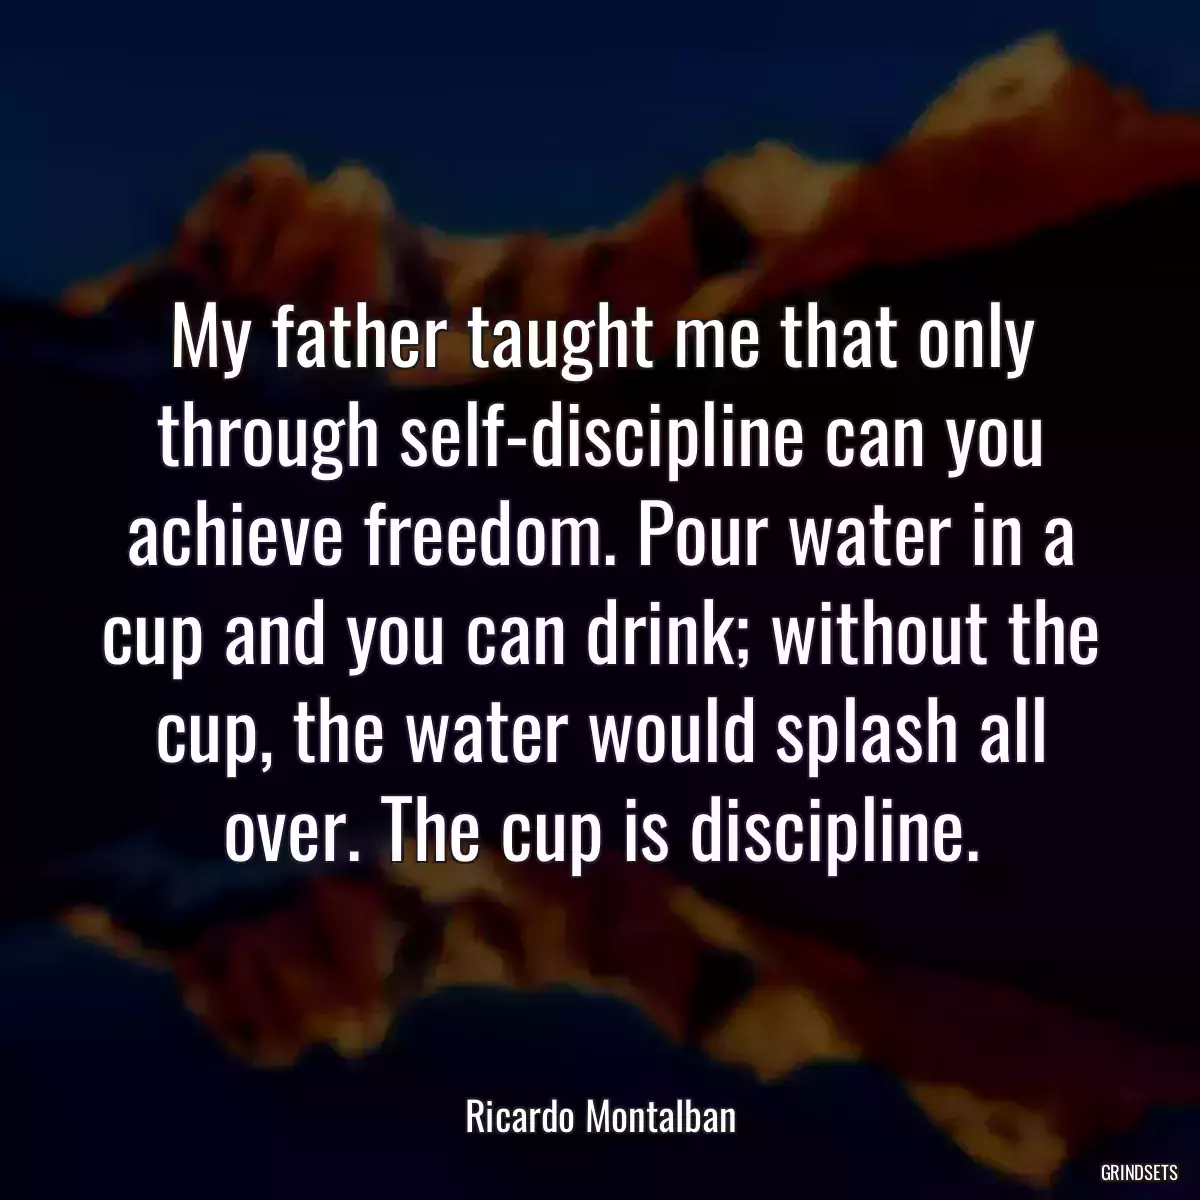 My father taught me that only through self-discipline can you achieve freedom. Pour water in a cup and you can drink; without the cup, the water would splash all over. The cup is discipline.